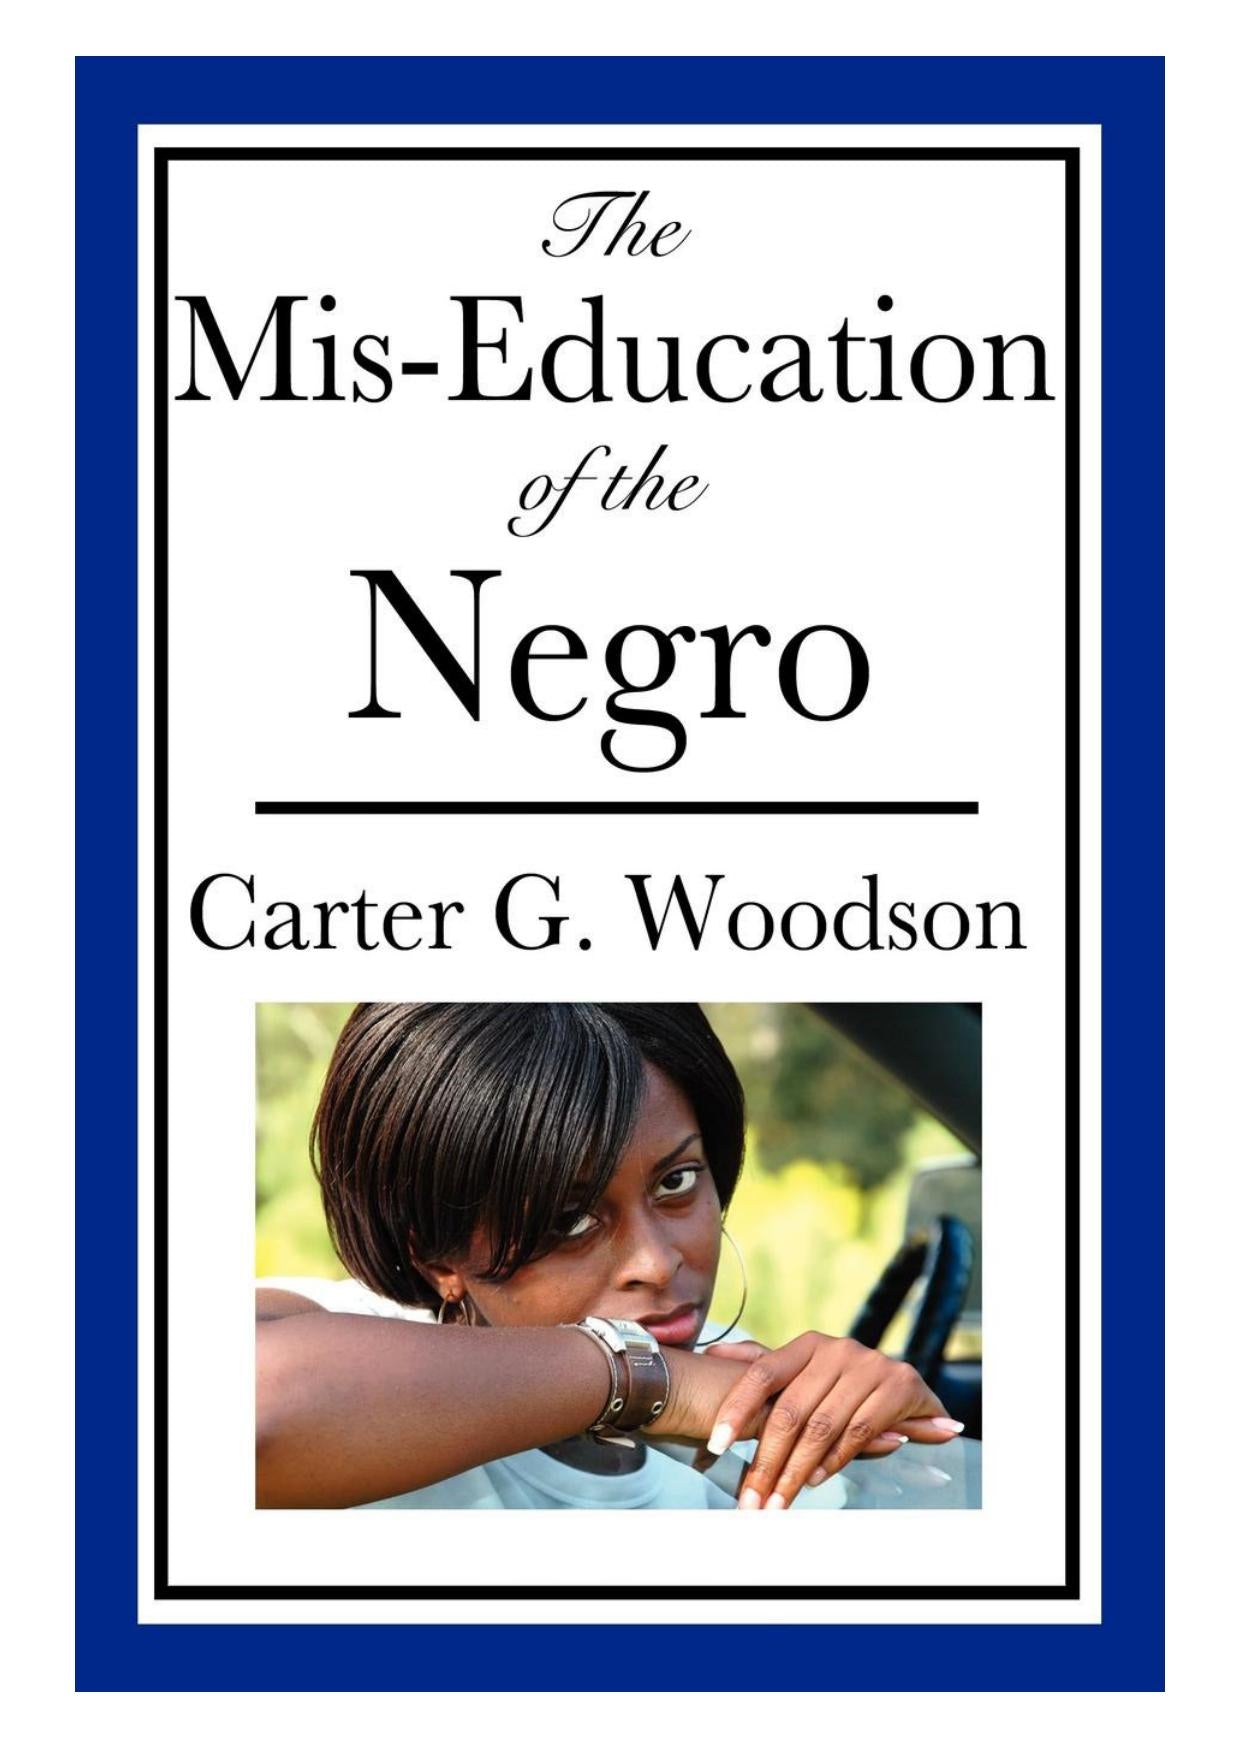 Cover art for The Mis-Education of the Negro.